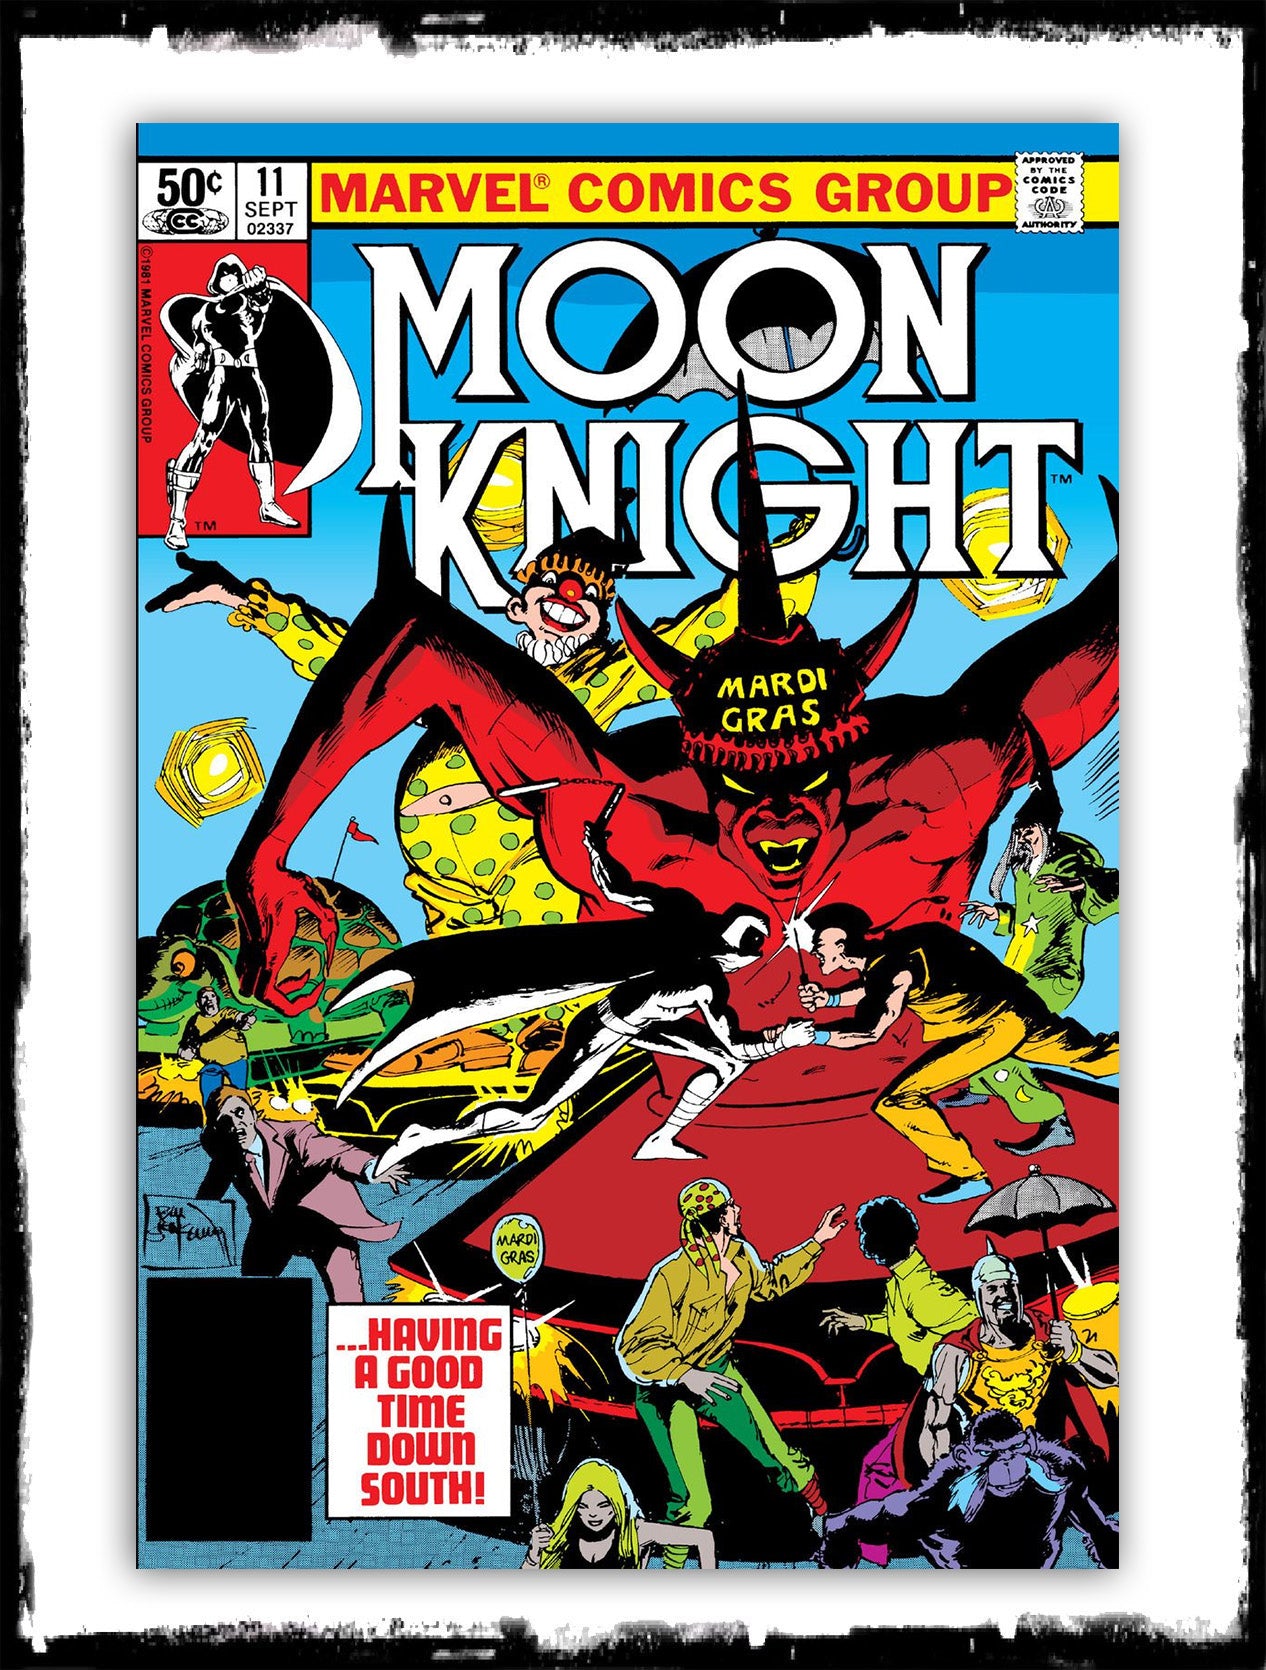 MOON KNIGHT - #11 "TO CATCH A KILLER" (1981 - VF+)